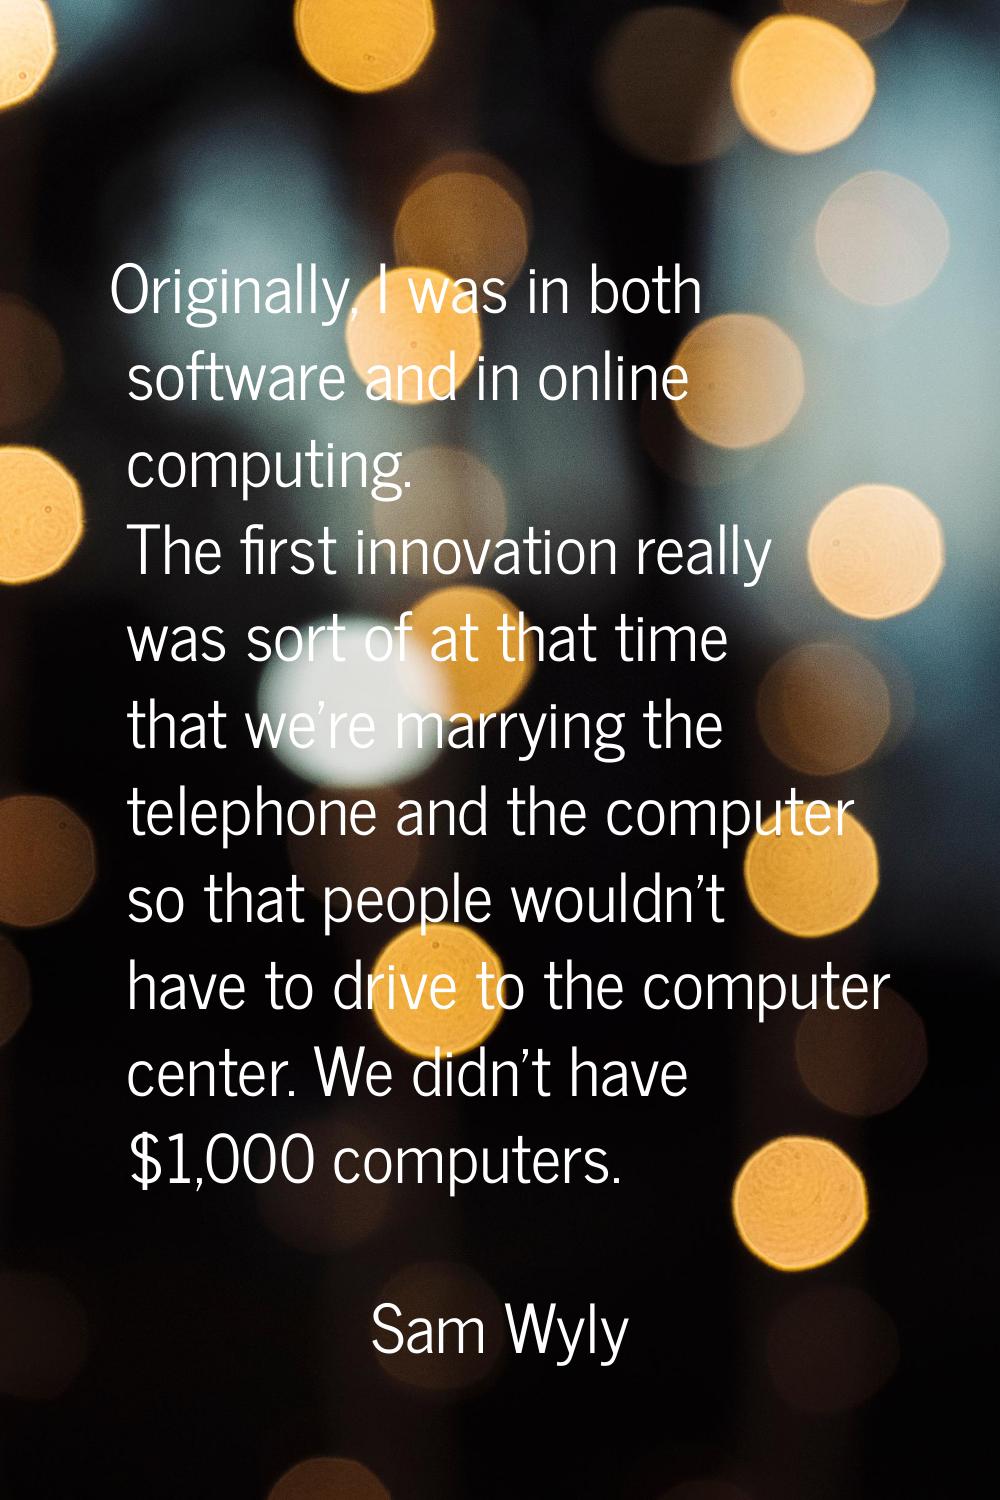 Originally, I was in both software and in online computing. The first innovation really was sort of